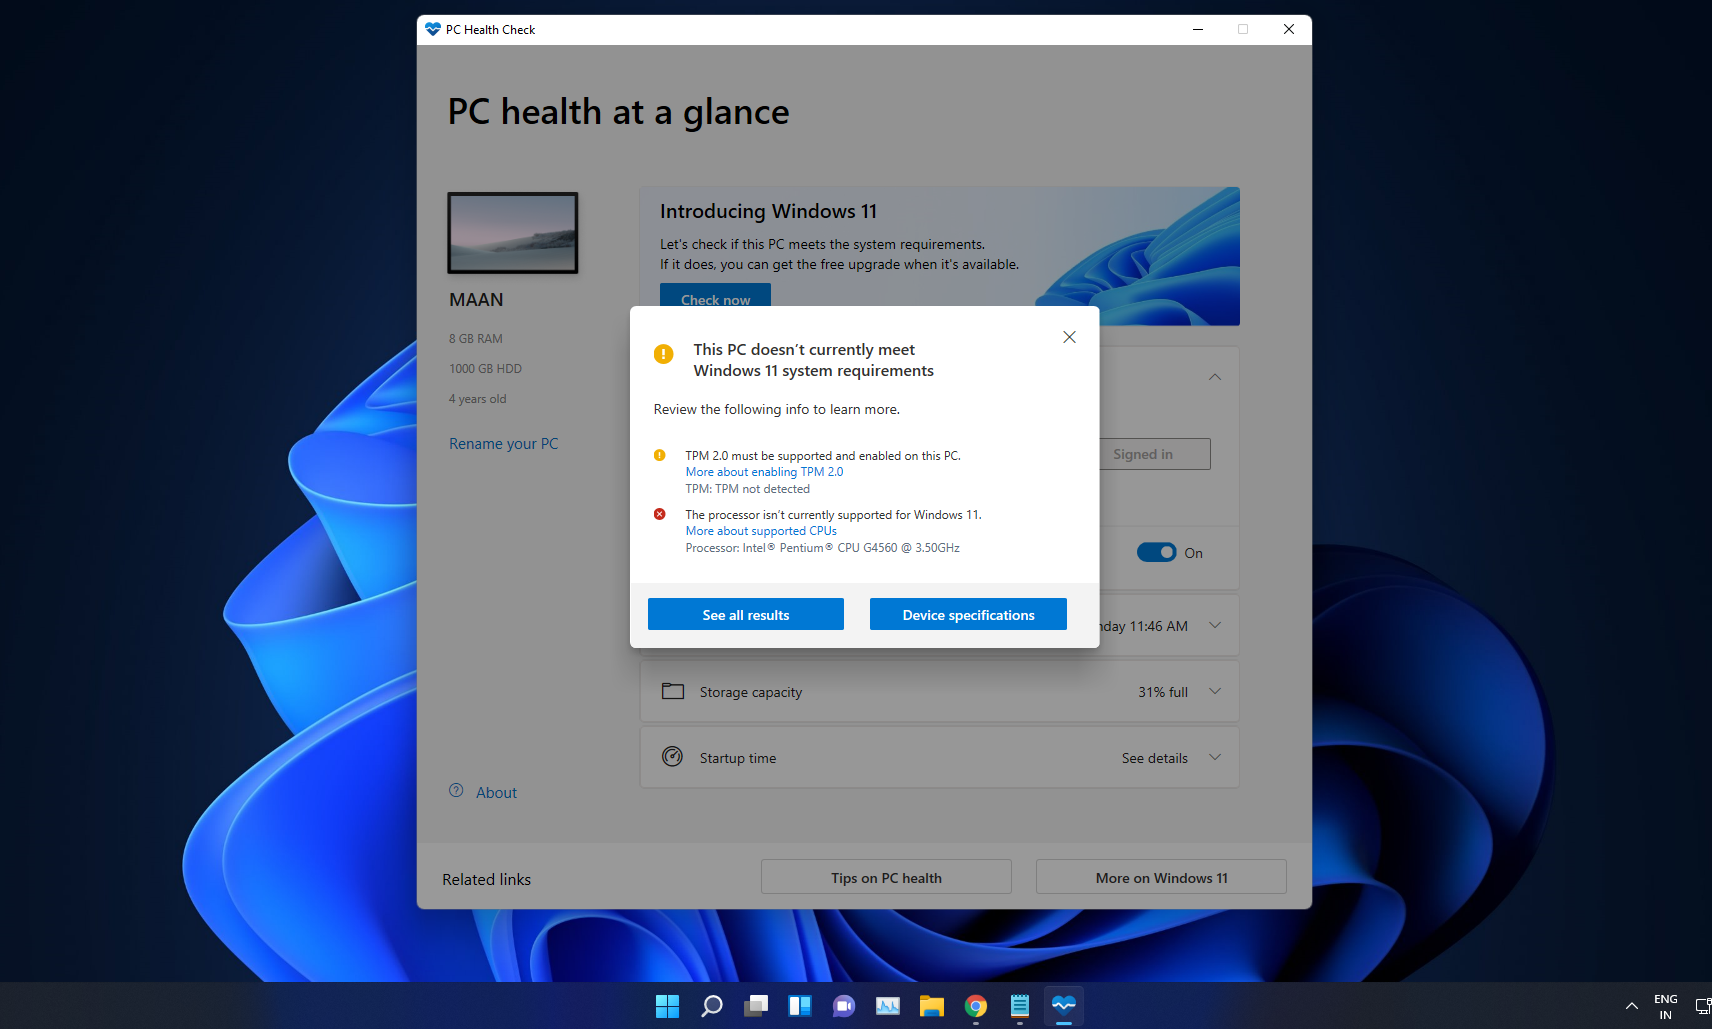 You can even see here that the PC Health App still tells me that my PC is not eligible. Despite running Windows 11, which is hilarious.